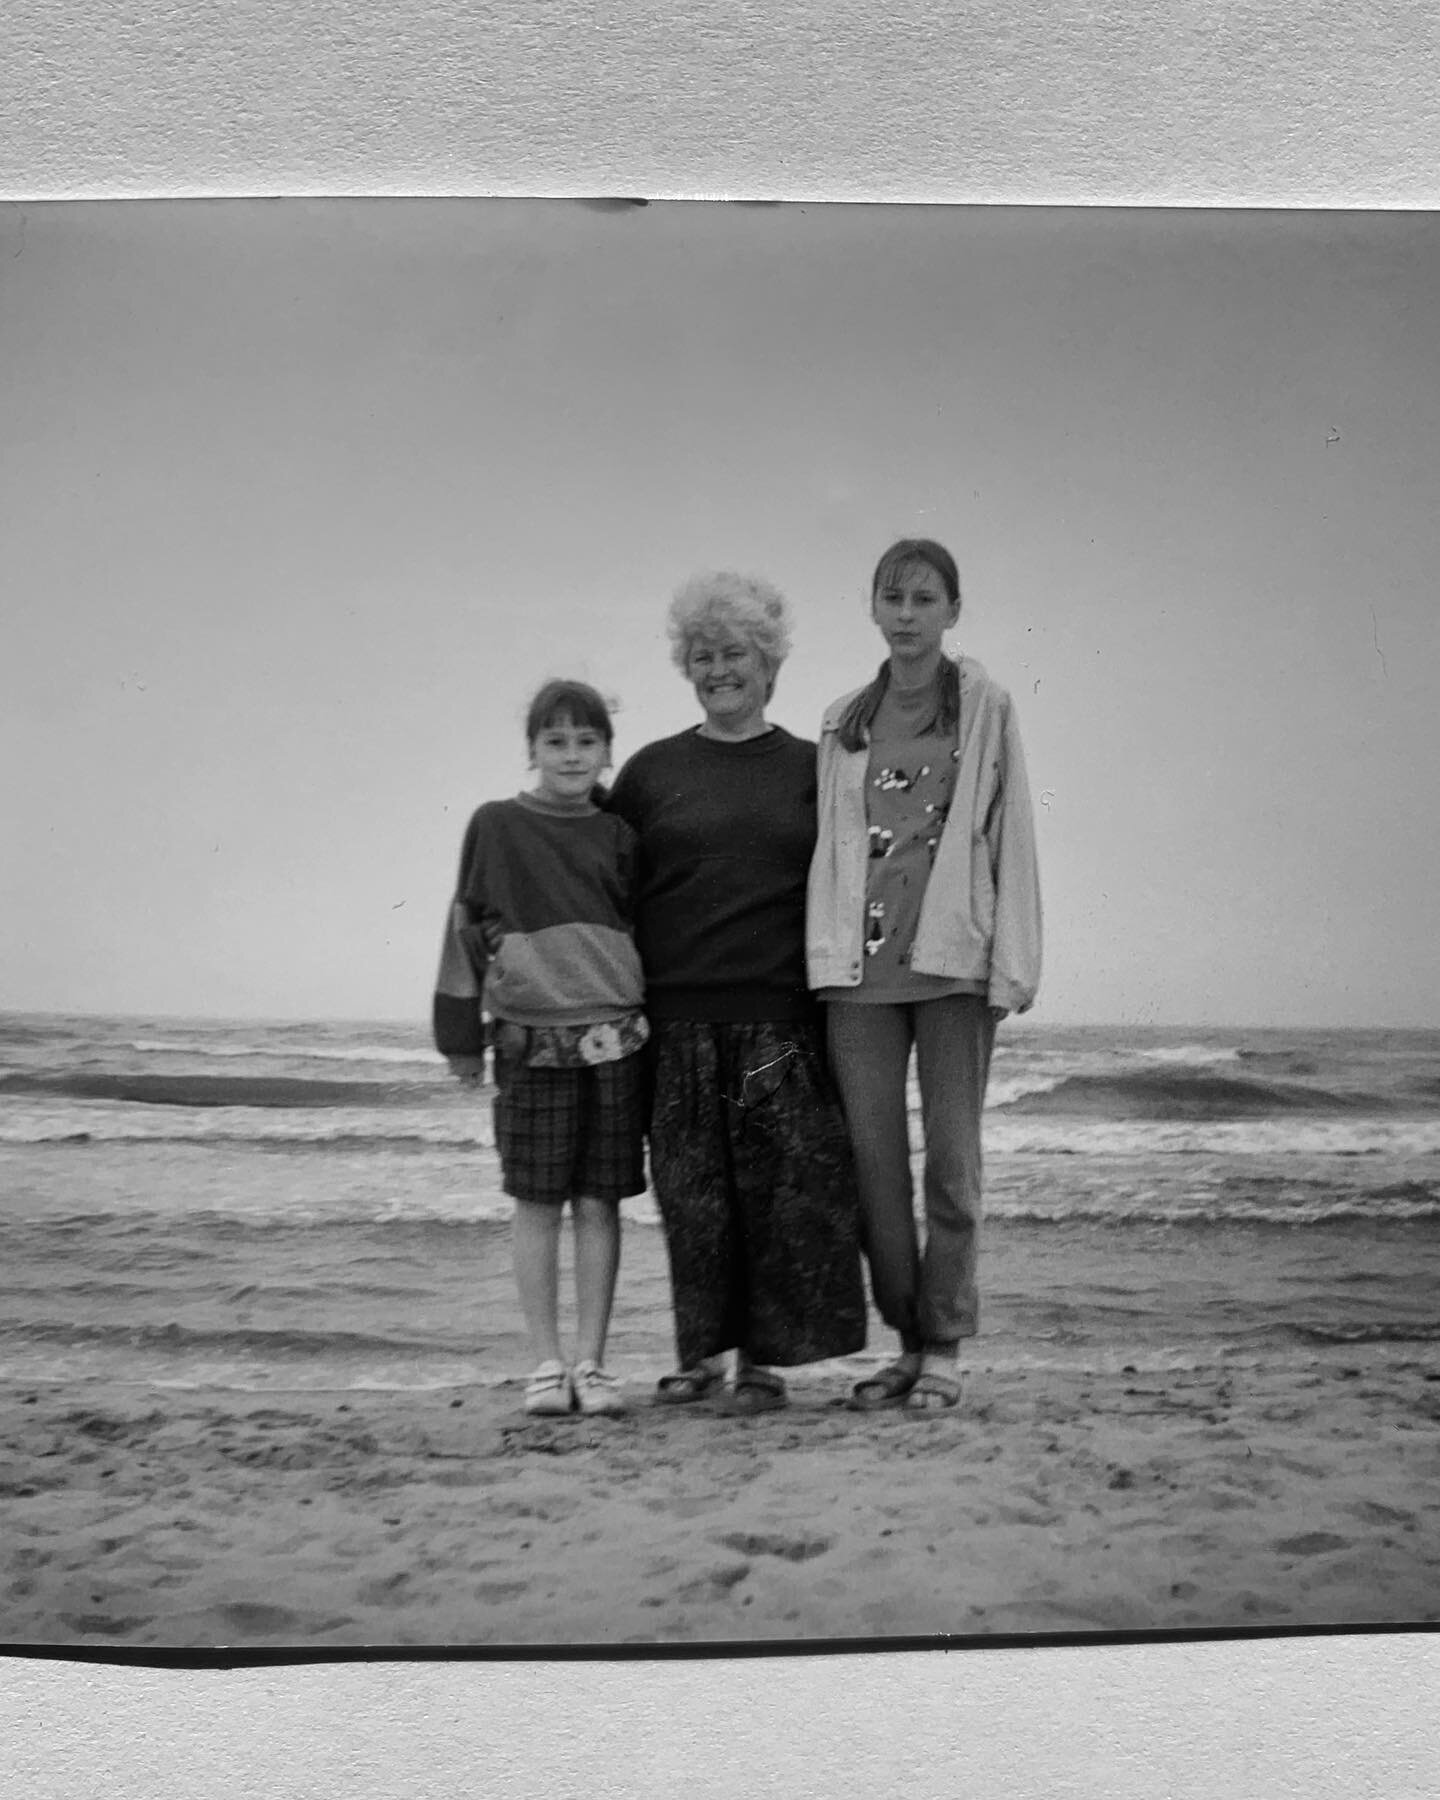 I&rsquo;ve always had a deep connection to my Lithuanian family. Every summer my sister and I would go to Lithuania to spend our summer holidays there. My grandma would take us to the Baltic sea and these are my best childhood memories ever.

Ever si